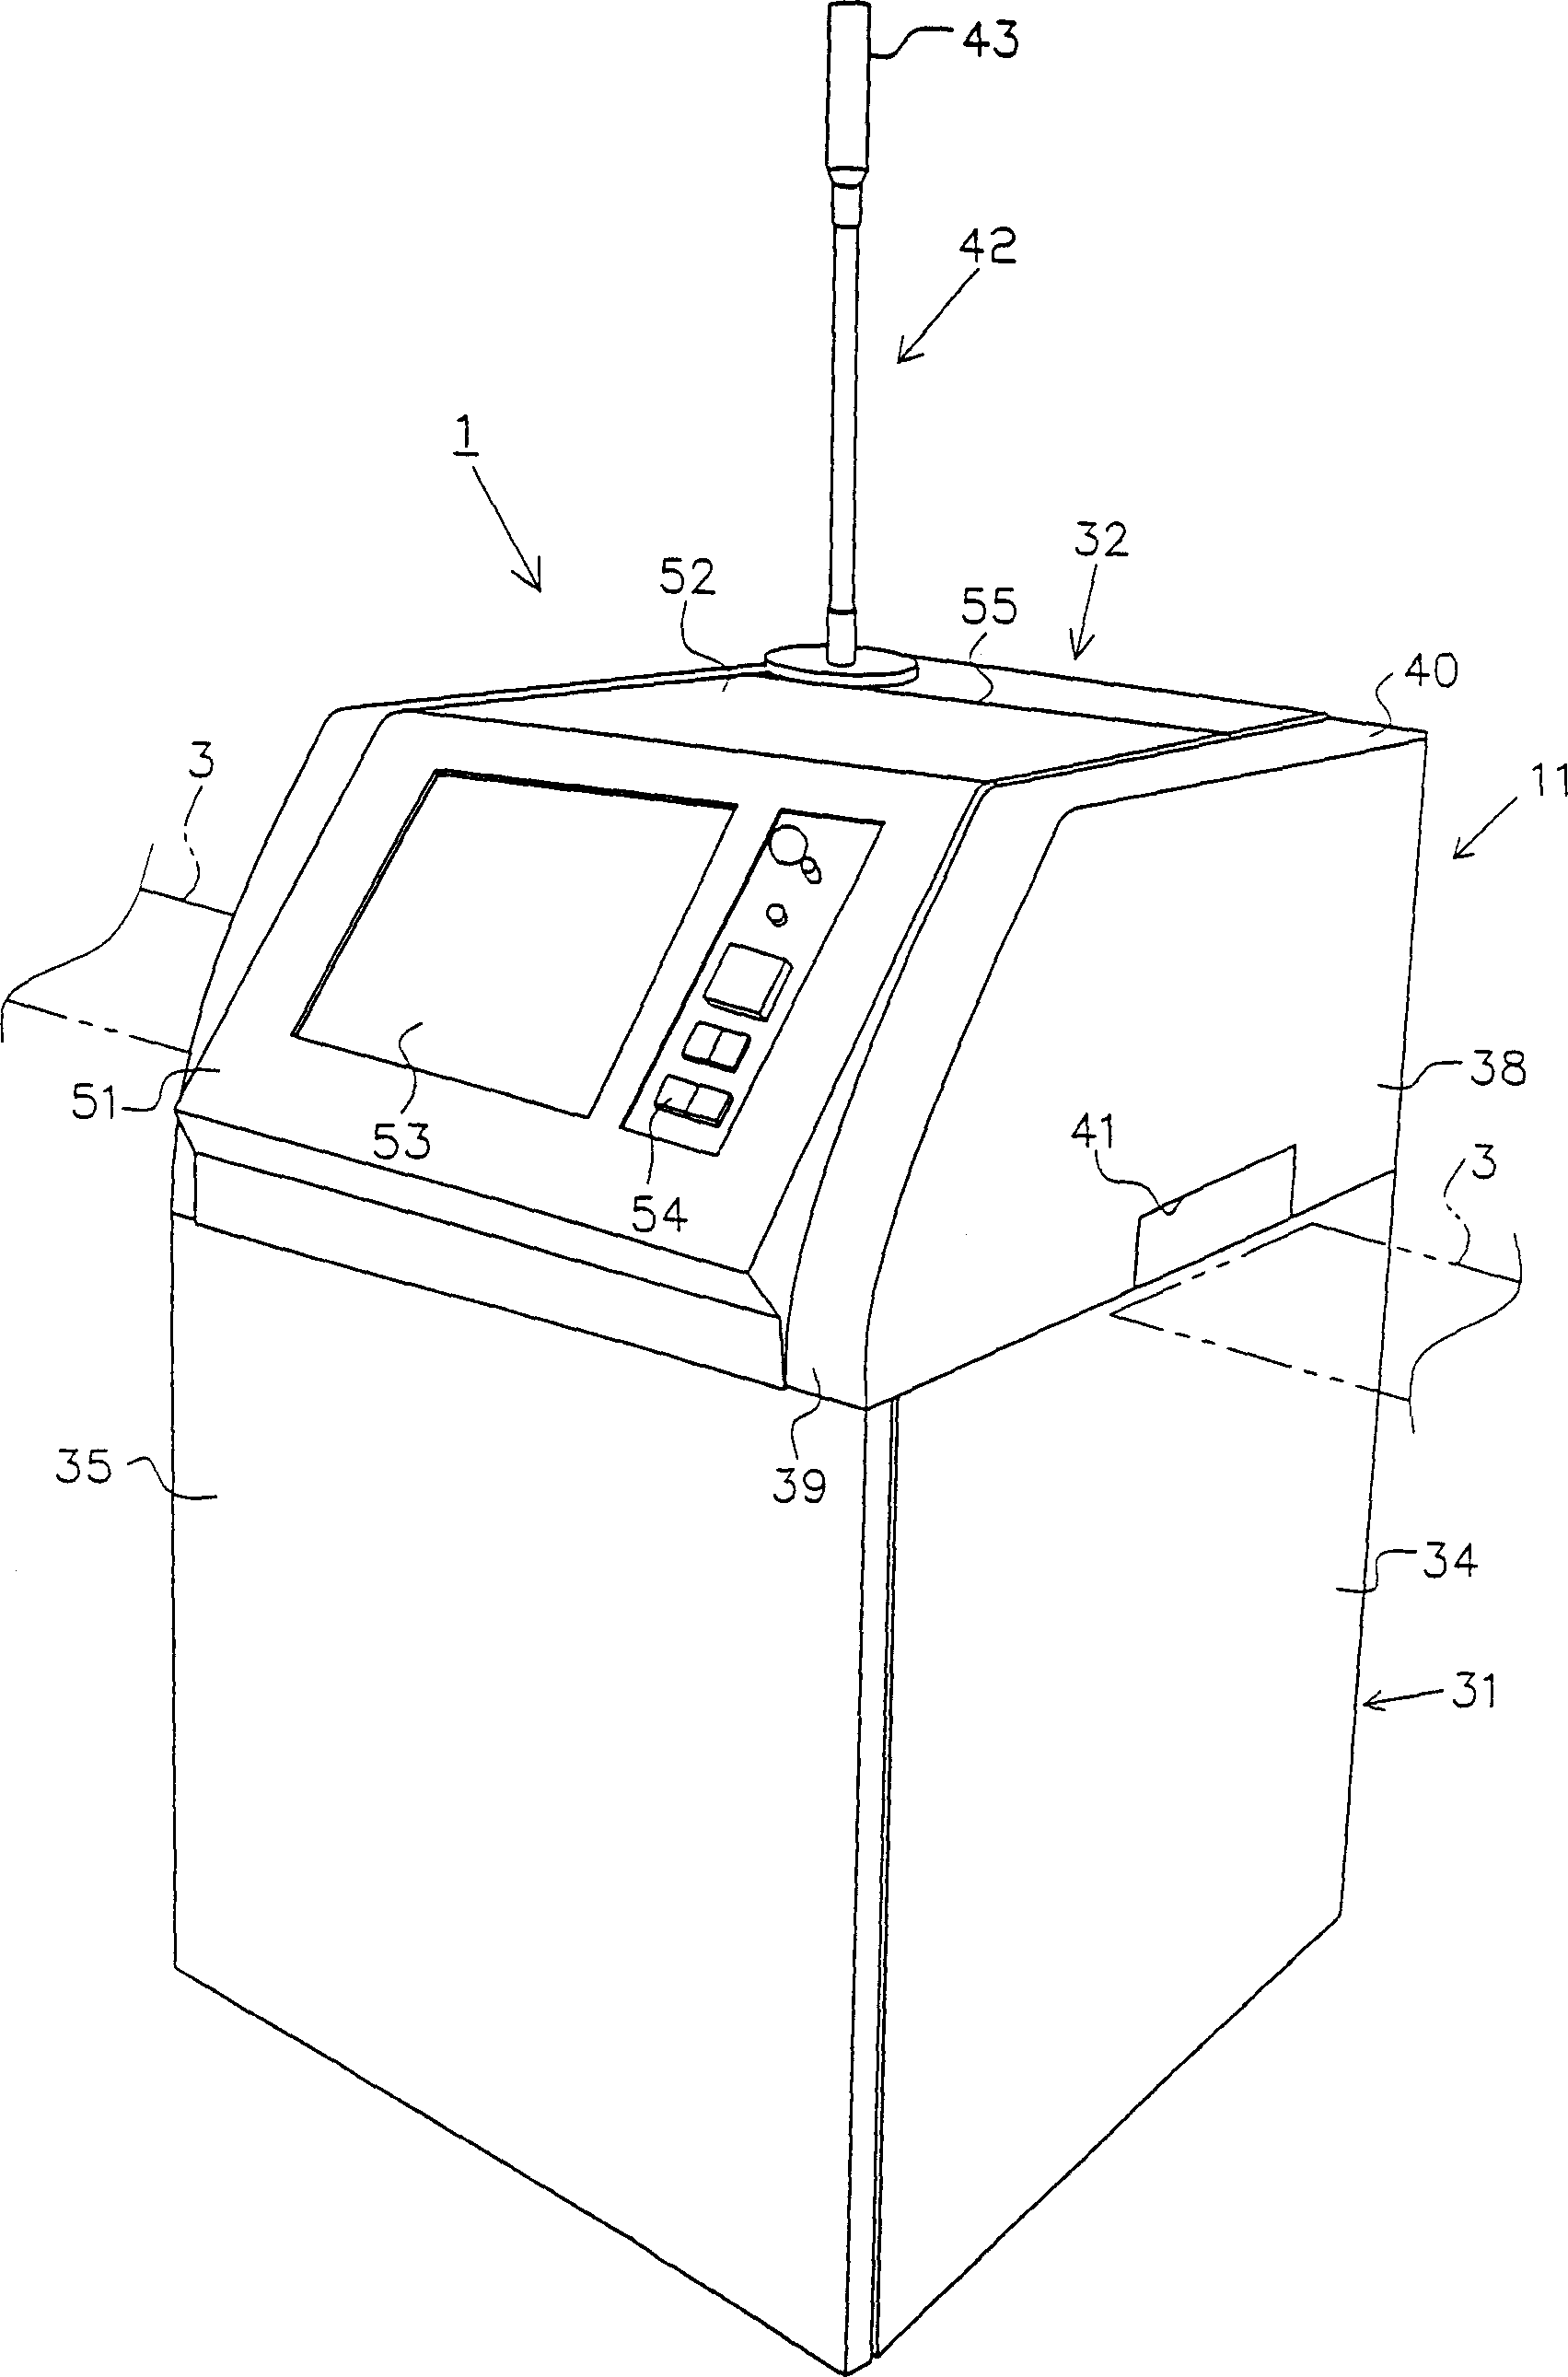 Printed circuit board fabrication-related device